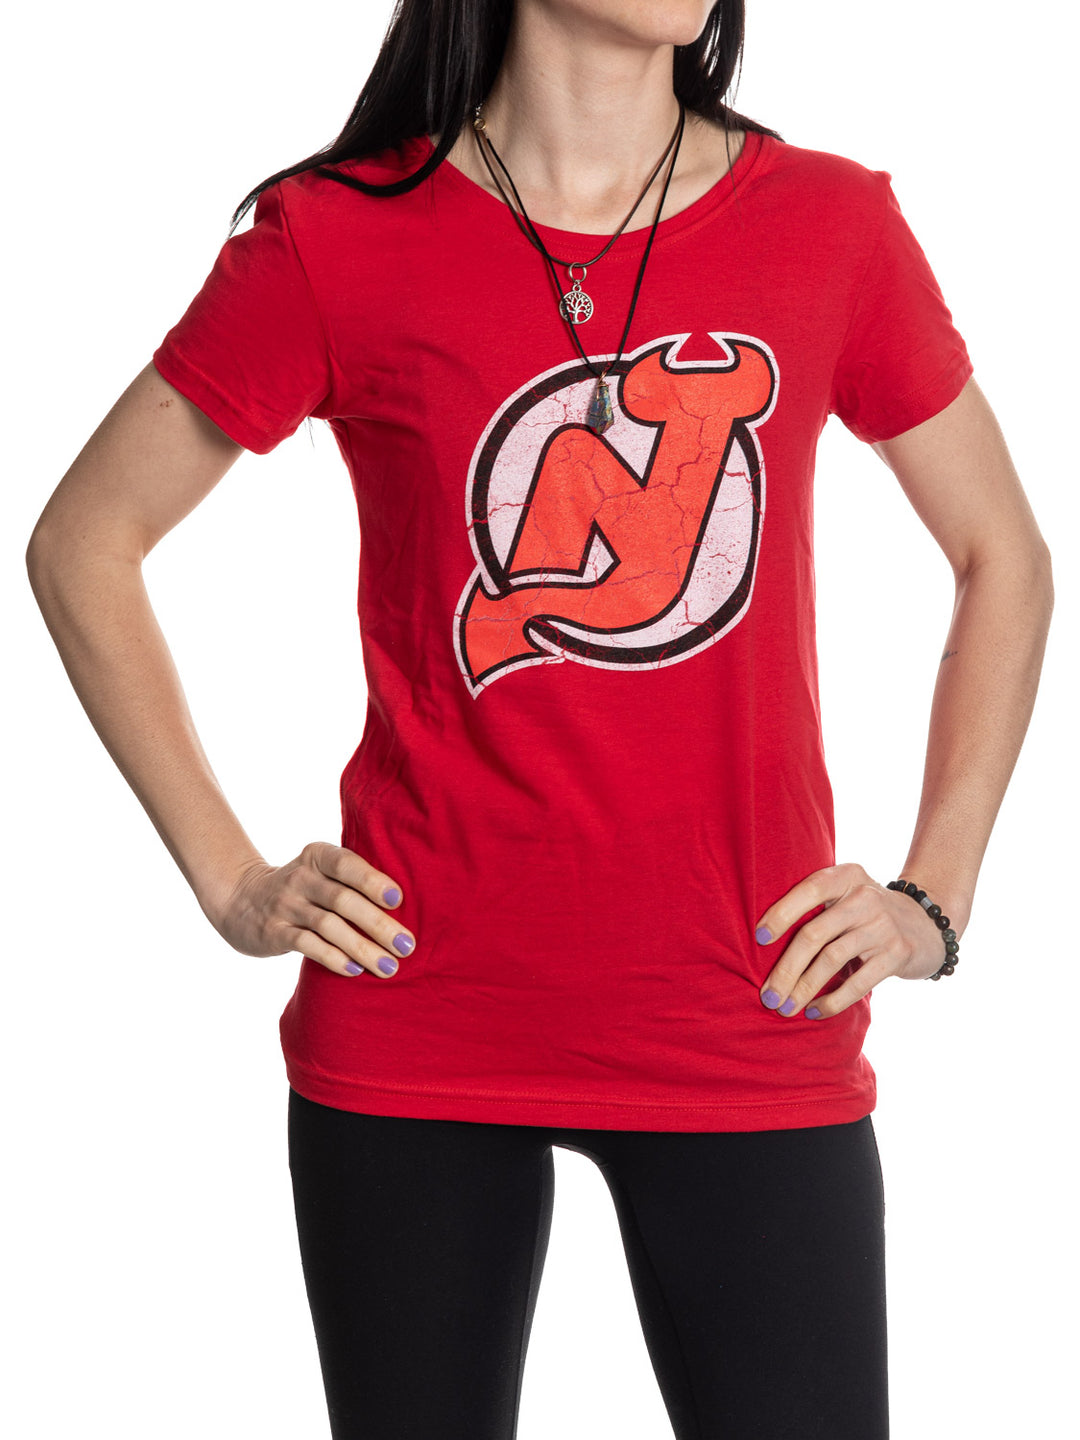 New Jersey Devils Women's Distressed Print Fitted Crew Neck Premium T-Shirt - Red